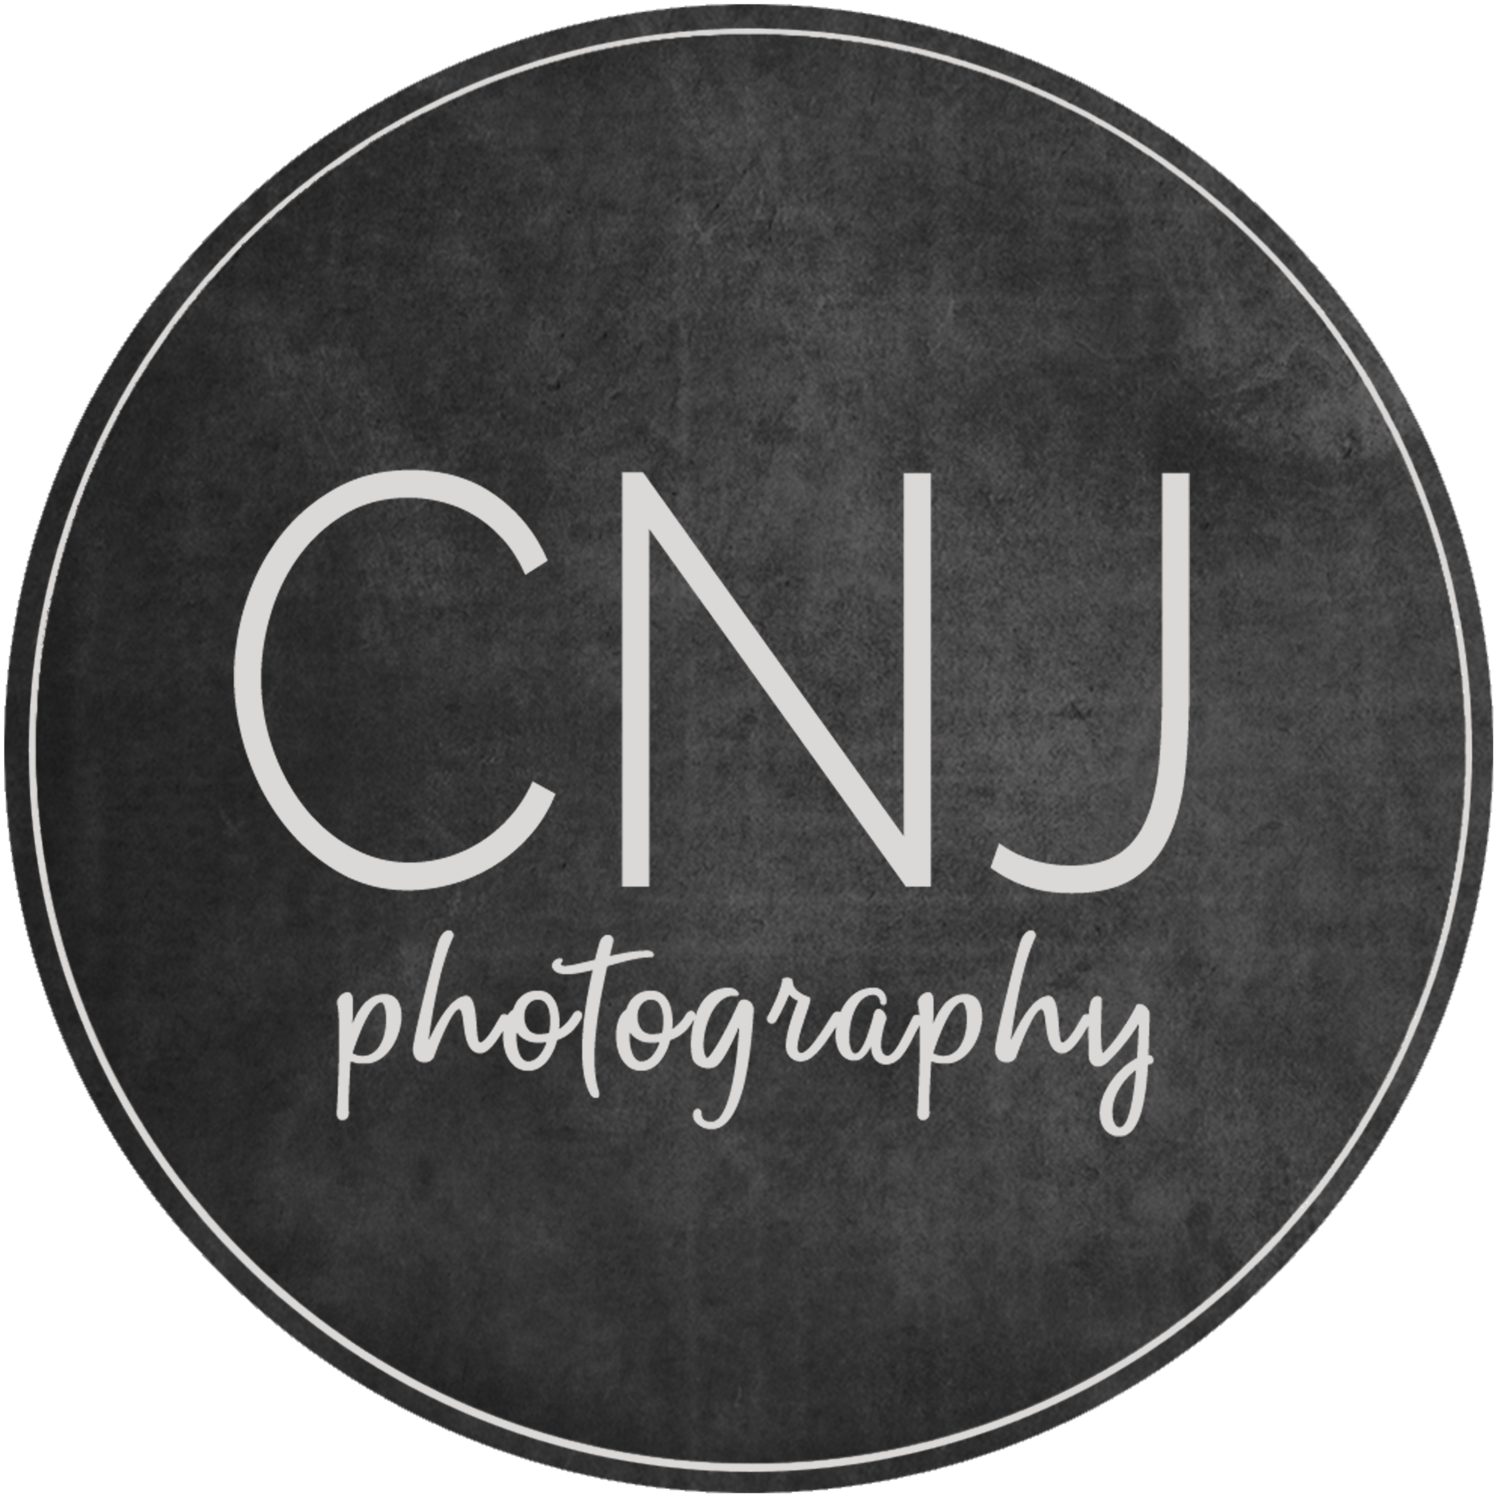 CNJ Photography